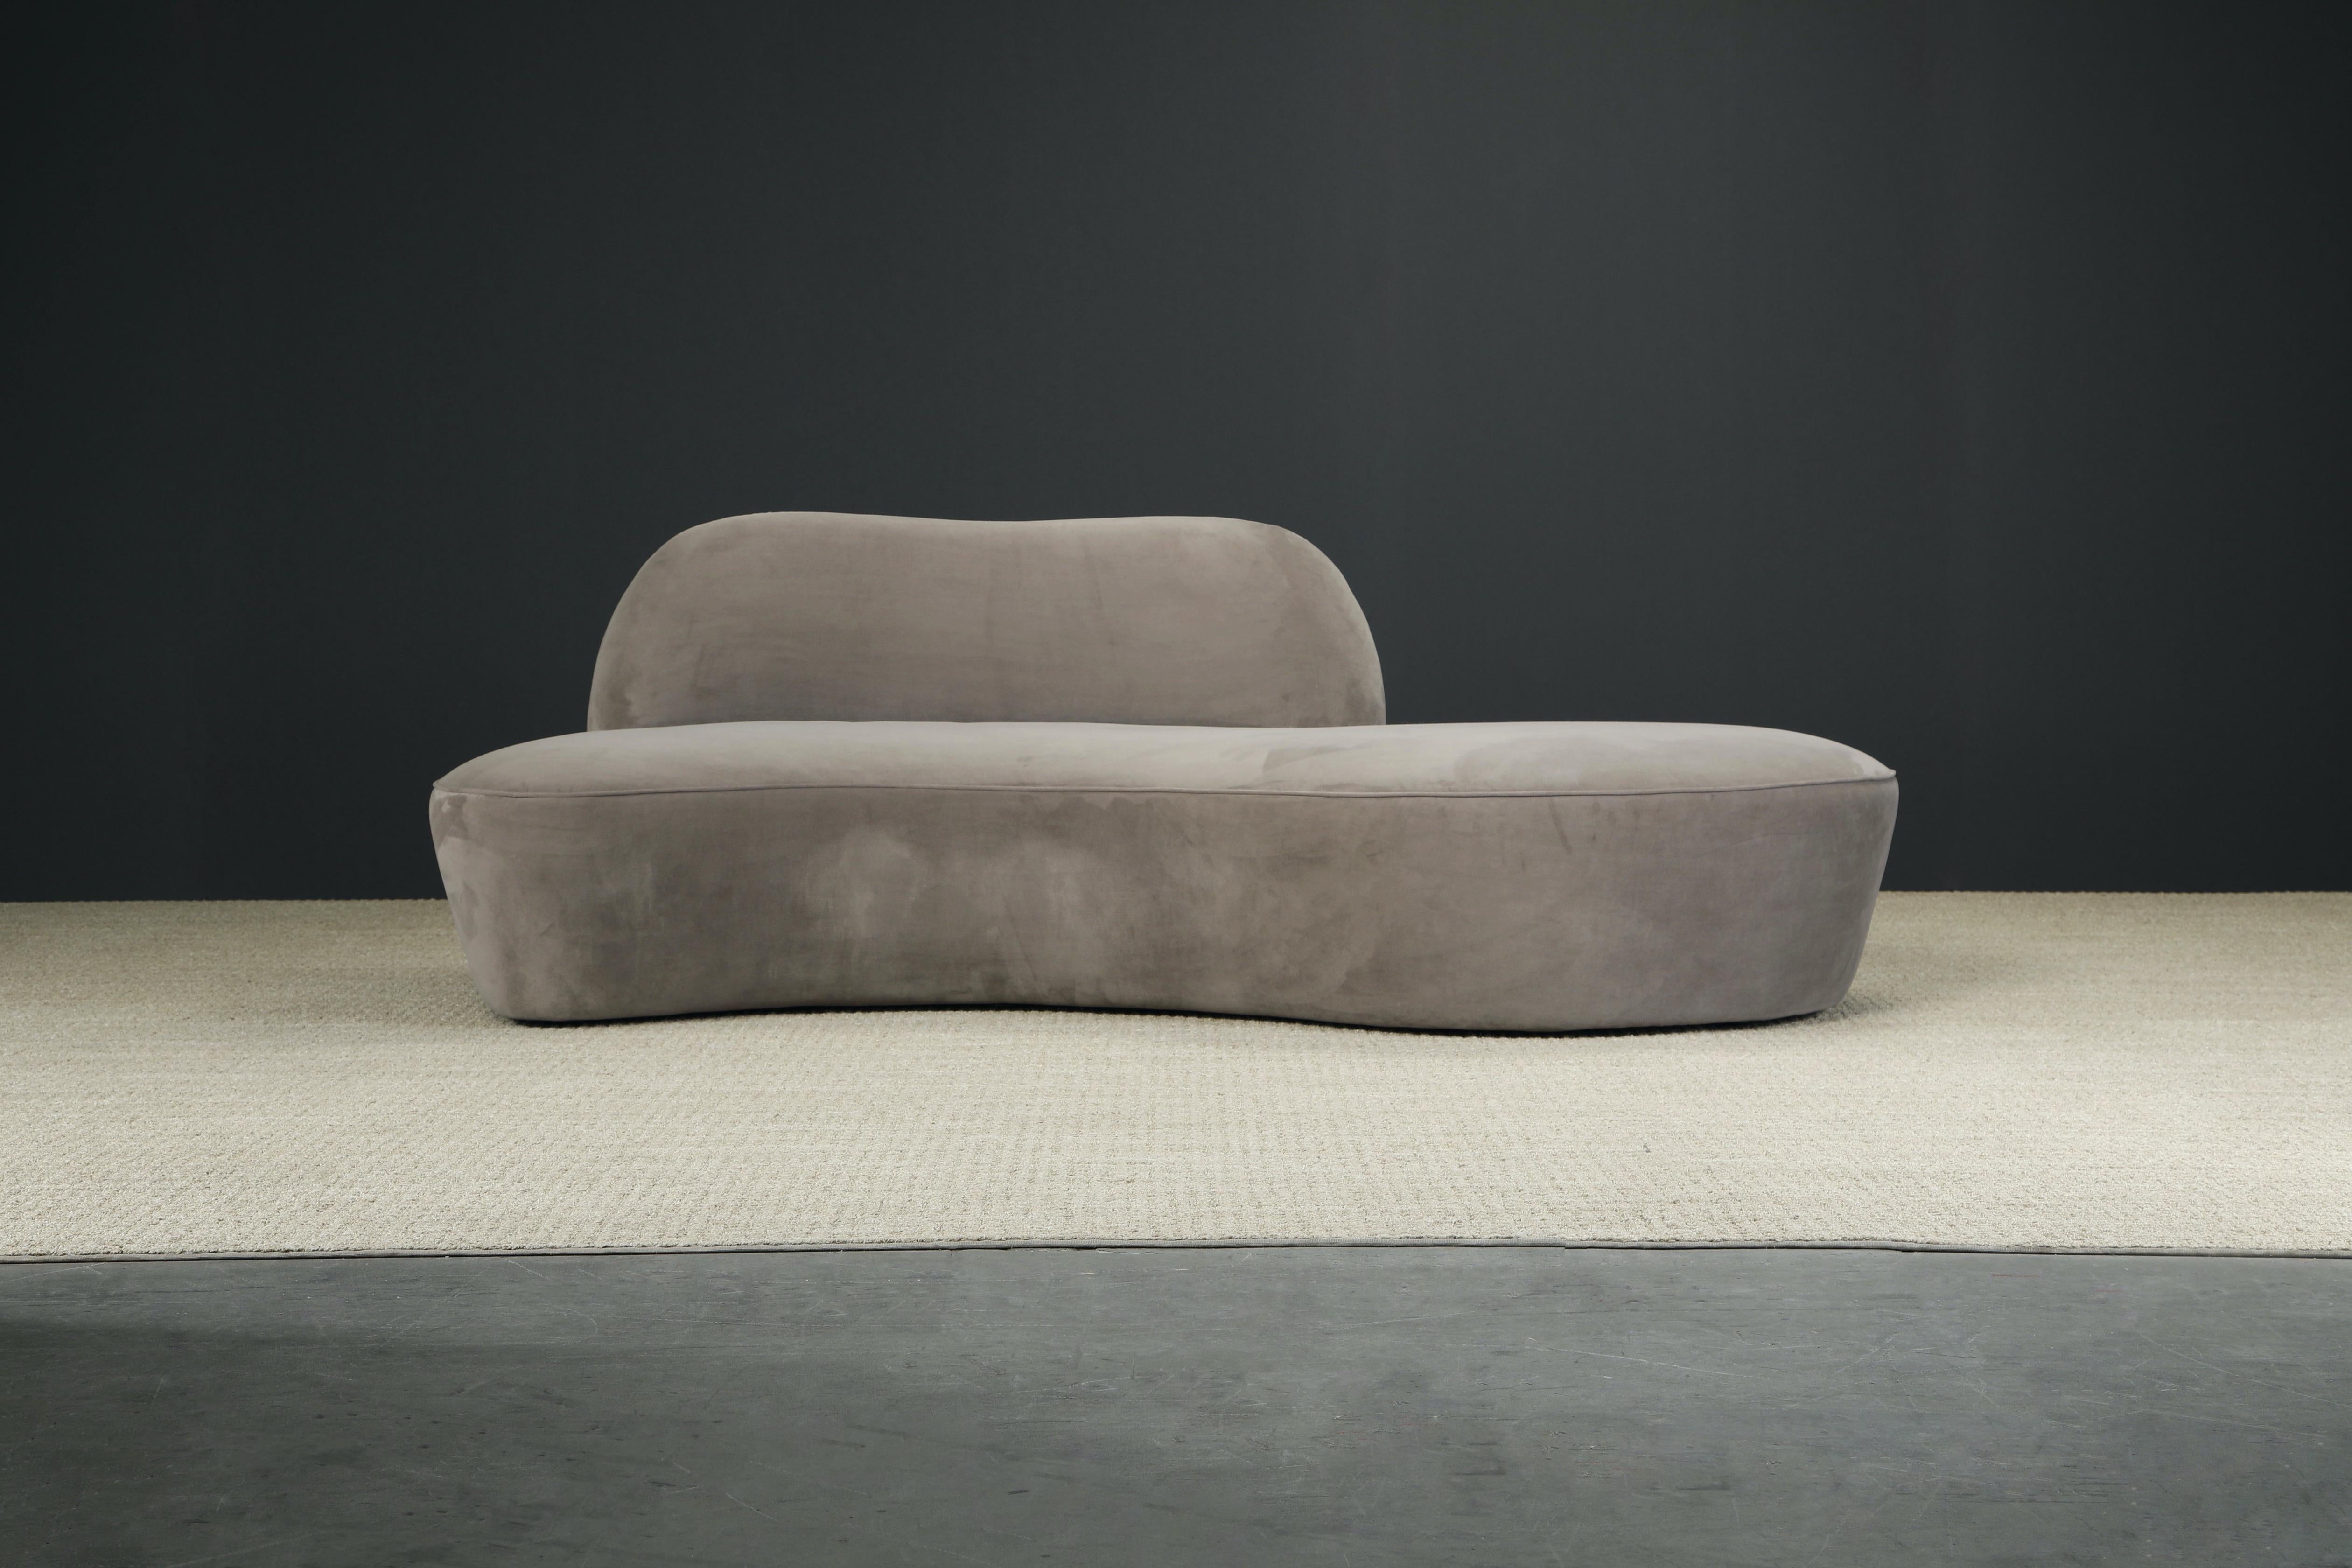 This spectacular example of Vladimir Kagan design was produced by American Leather in 2012, in its original Alcantara (ultrasuede) in a medium grey color called 'Otter', signed underneath with American Leather labels.

Modeled after the early